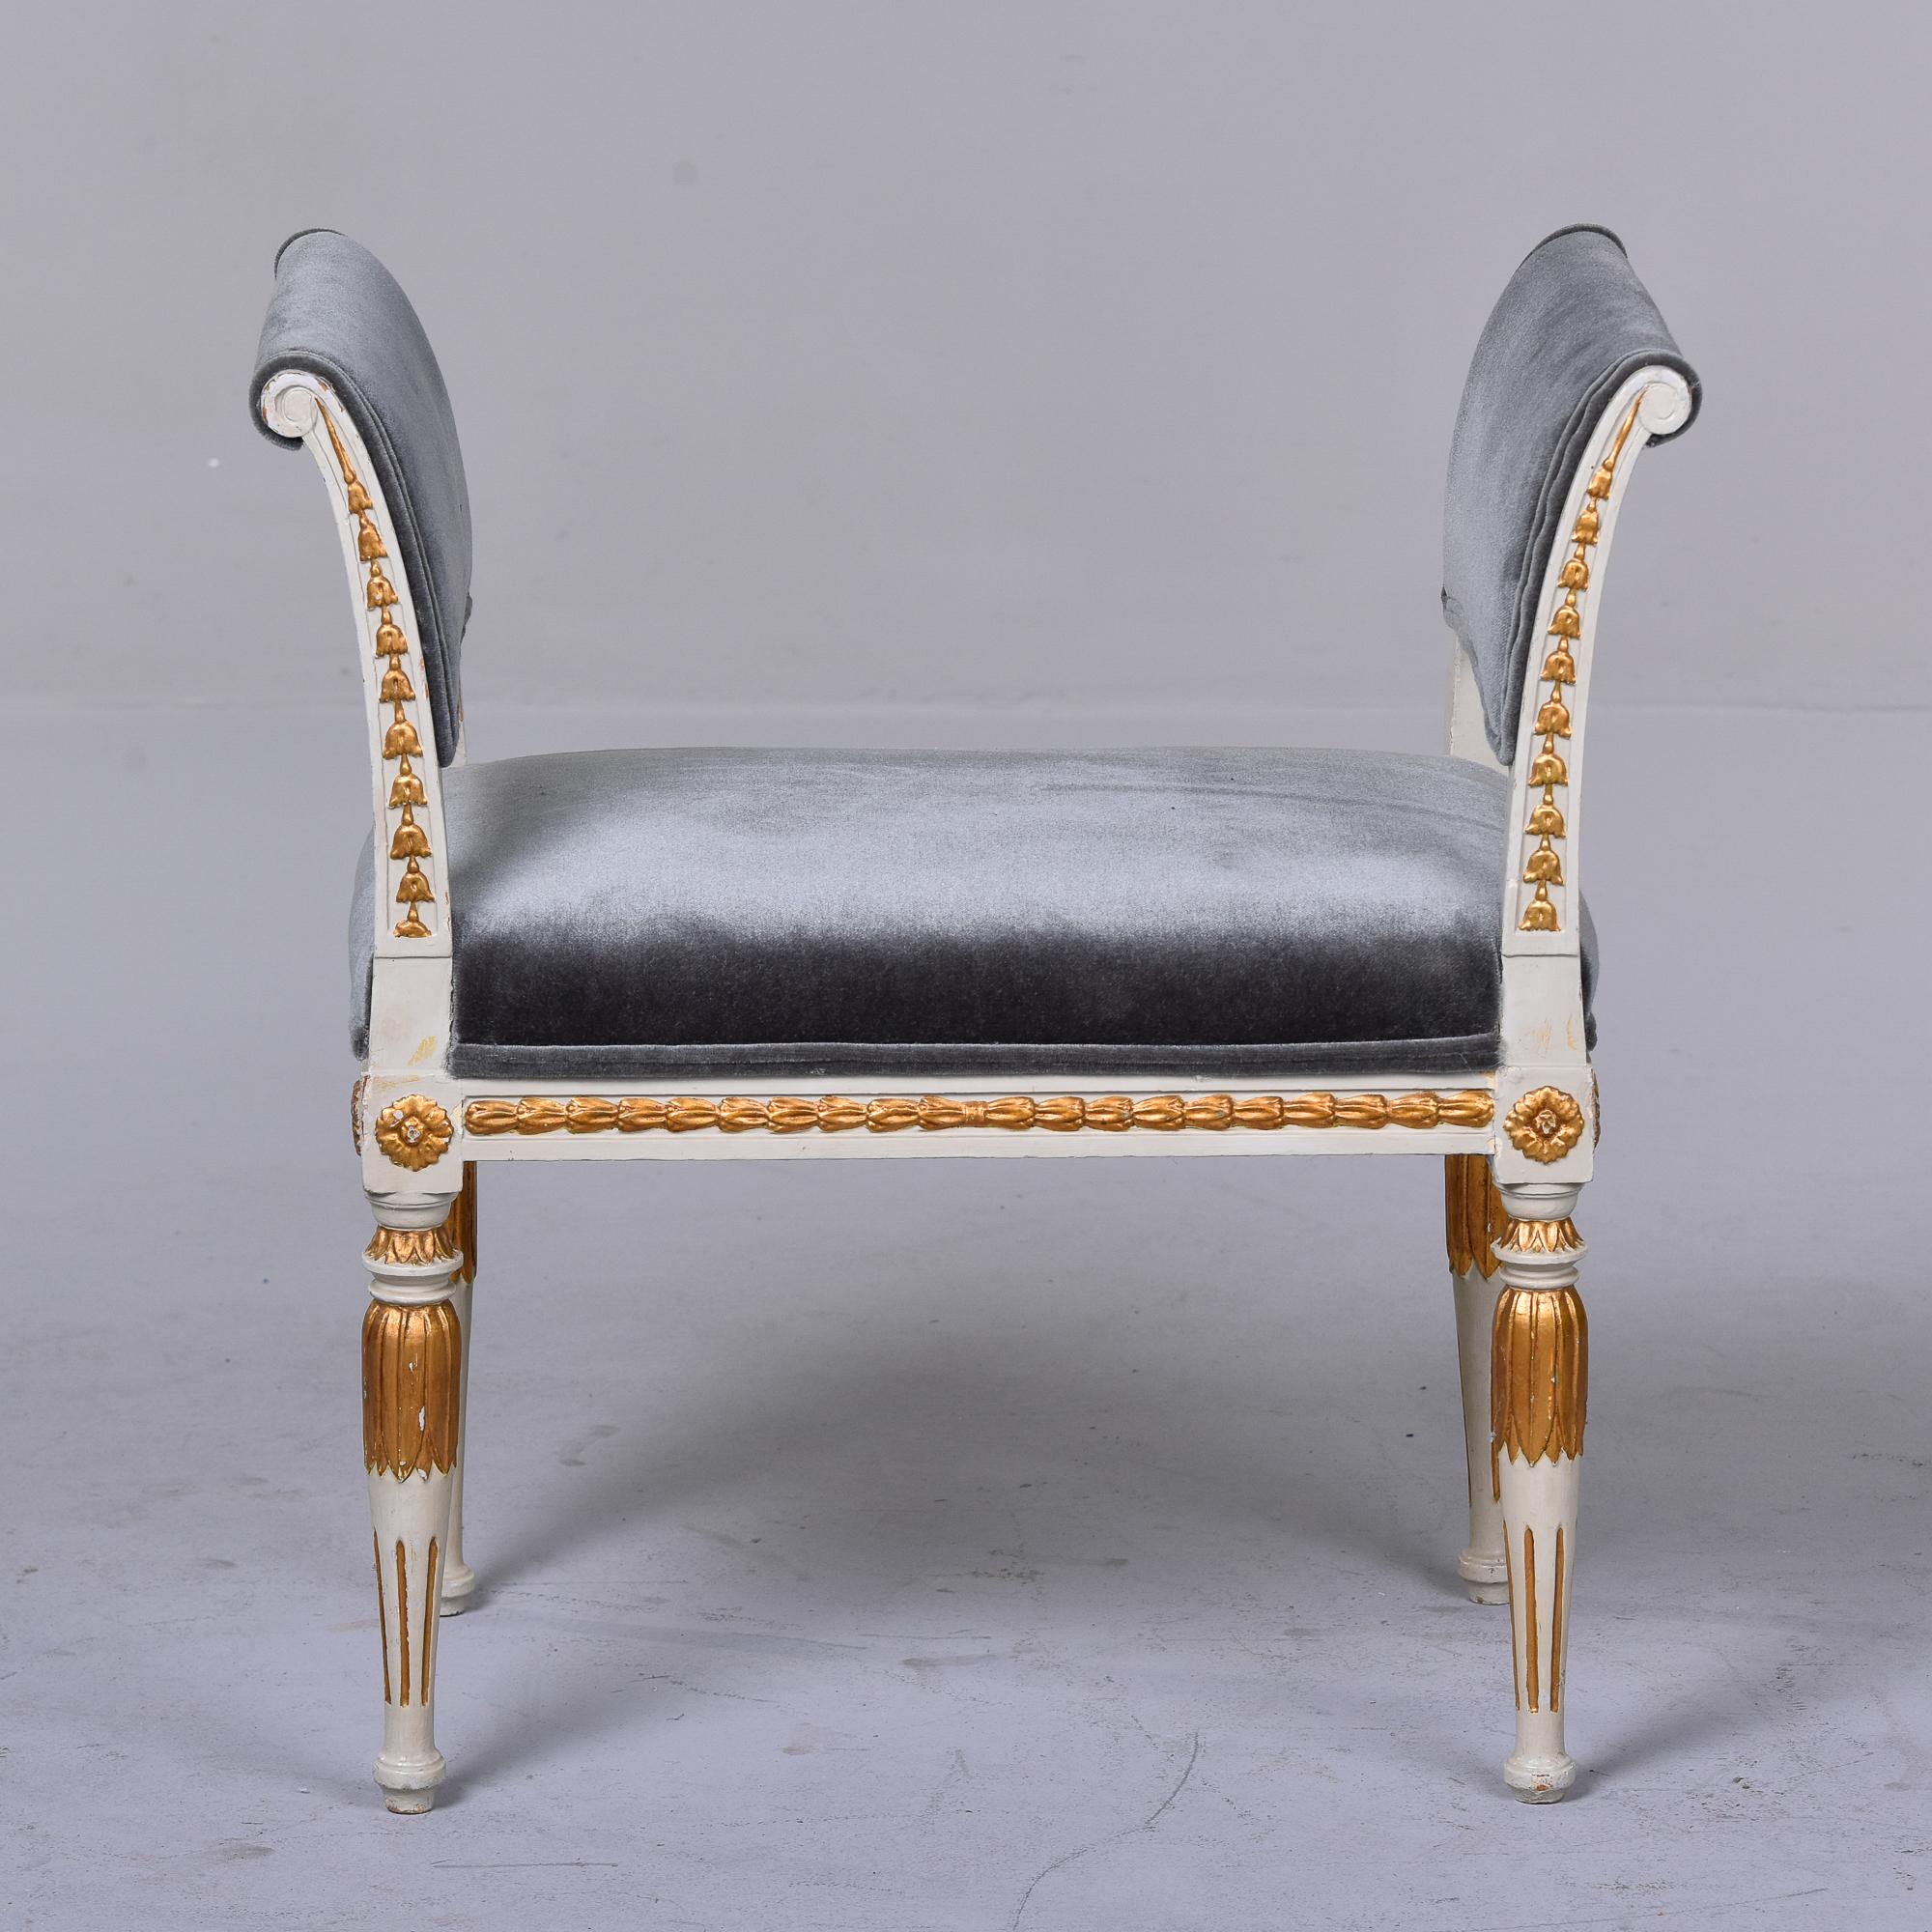 Gesso Empire Style High Sided Bench with Gilt Details and Mohair Velvet Upholstery For Sale